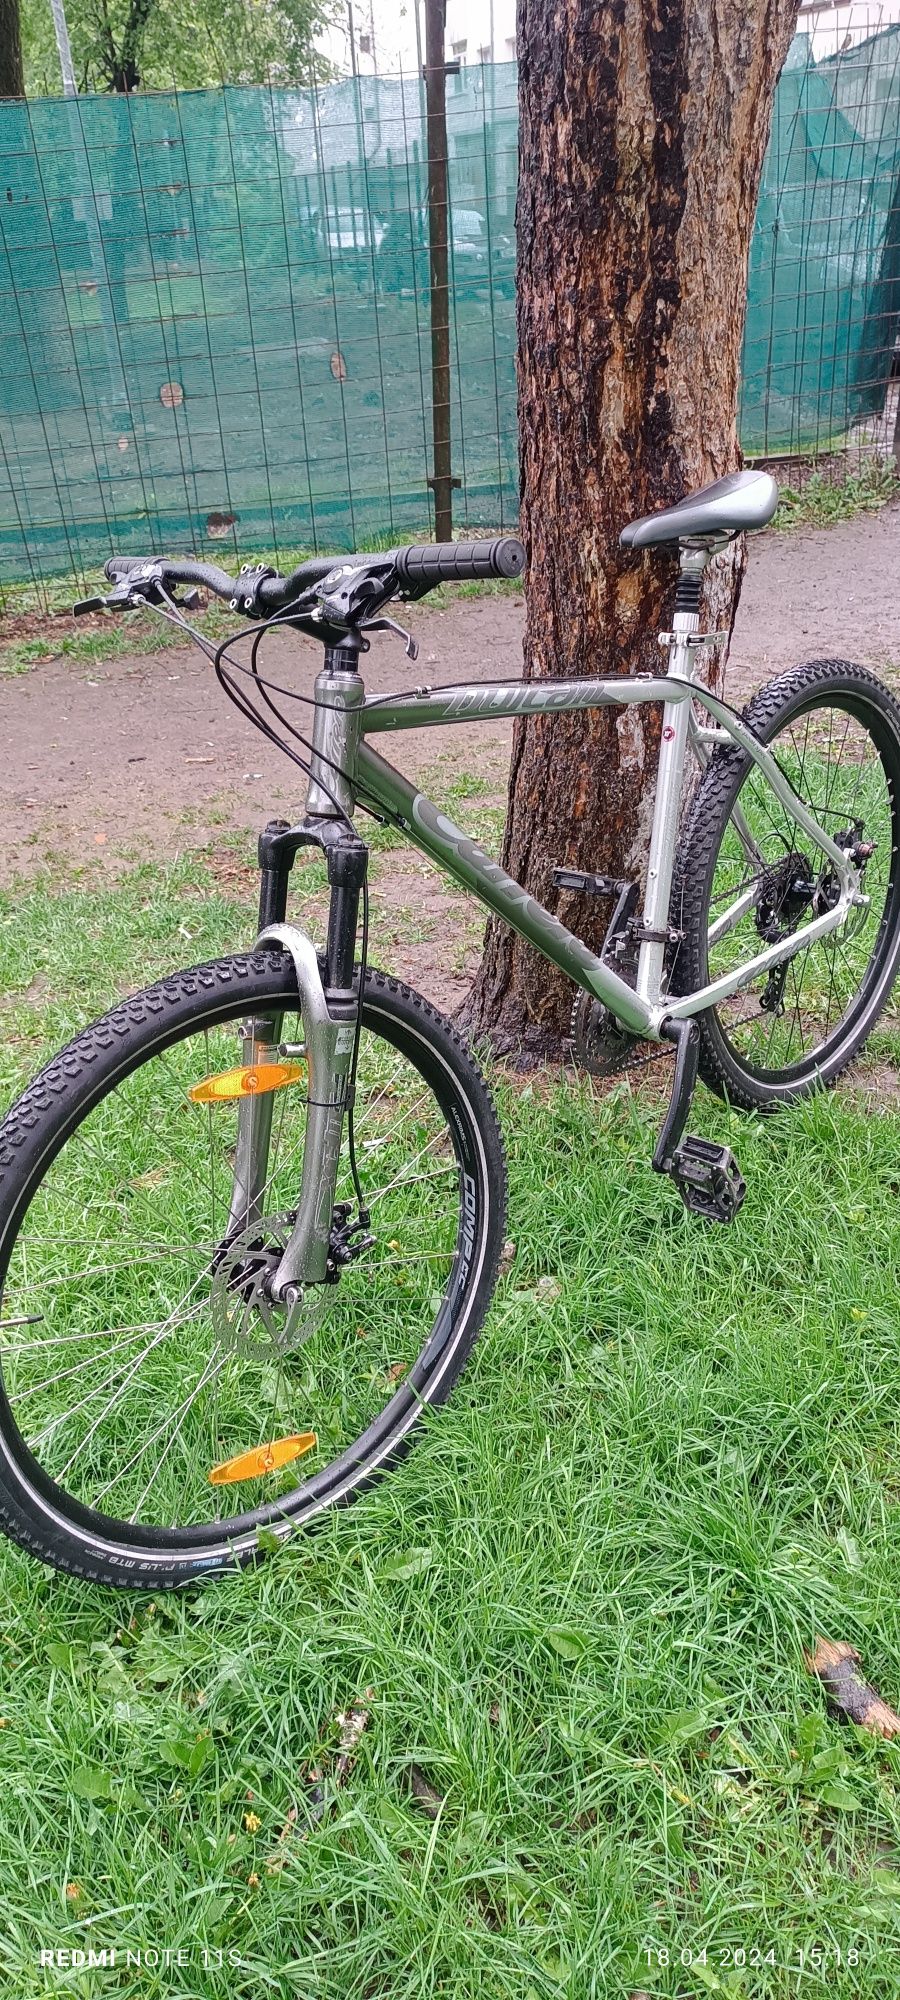 Biciclete toate marimile (20-24_26 si 28").Toate sint functionale